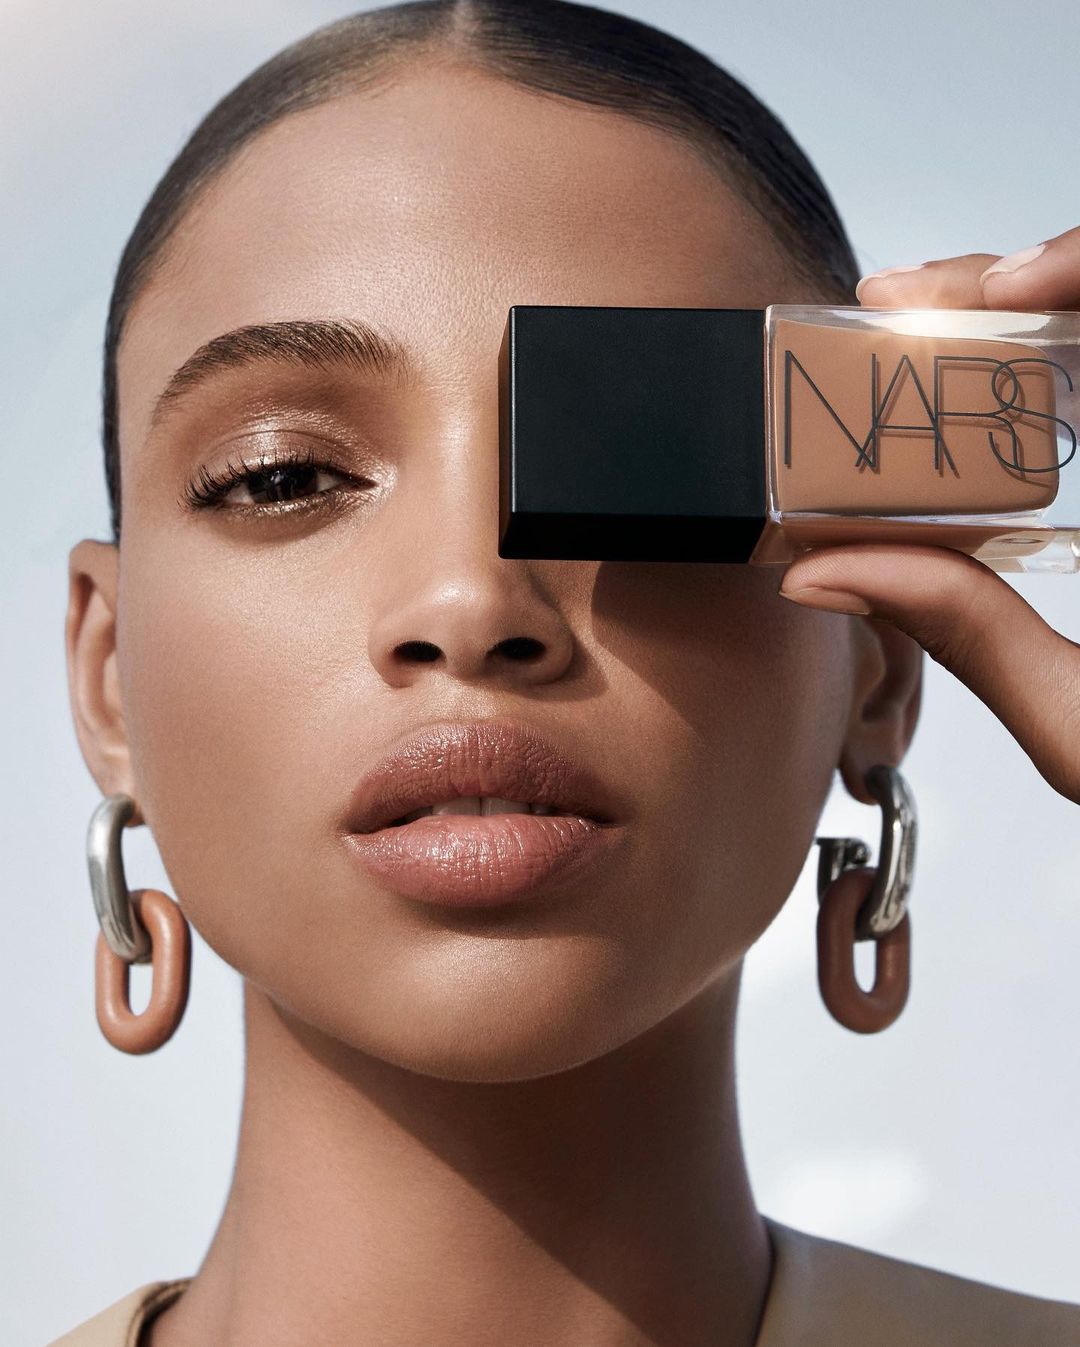 NARS Light Reflecting Foundation for Nude Makeup